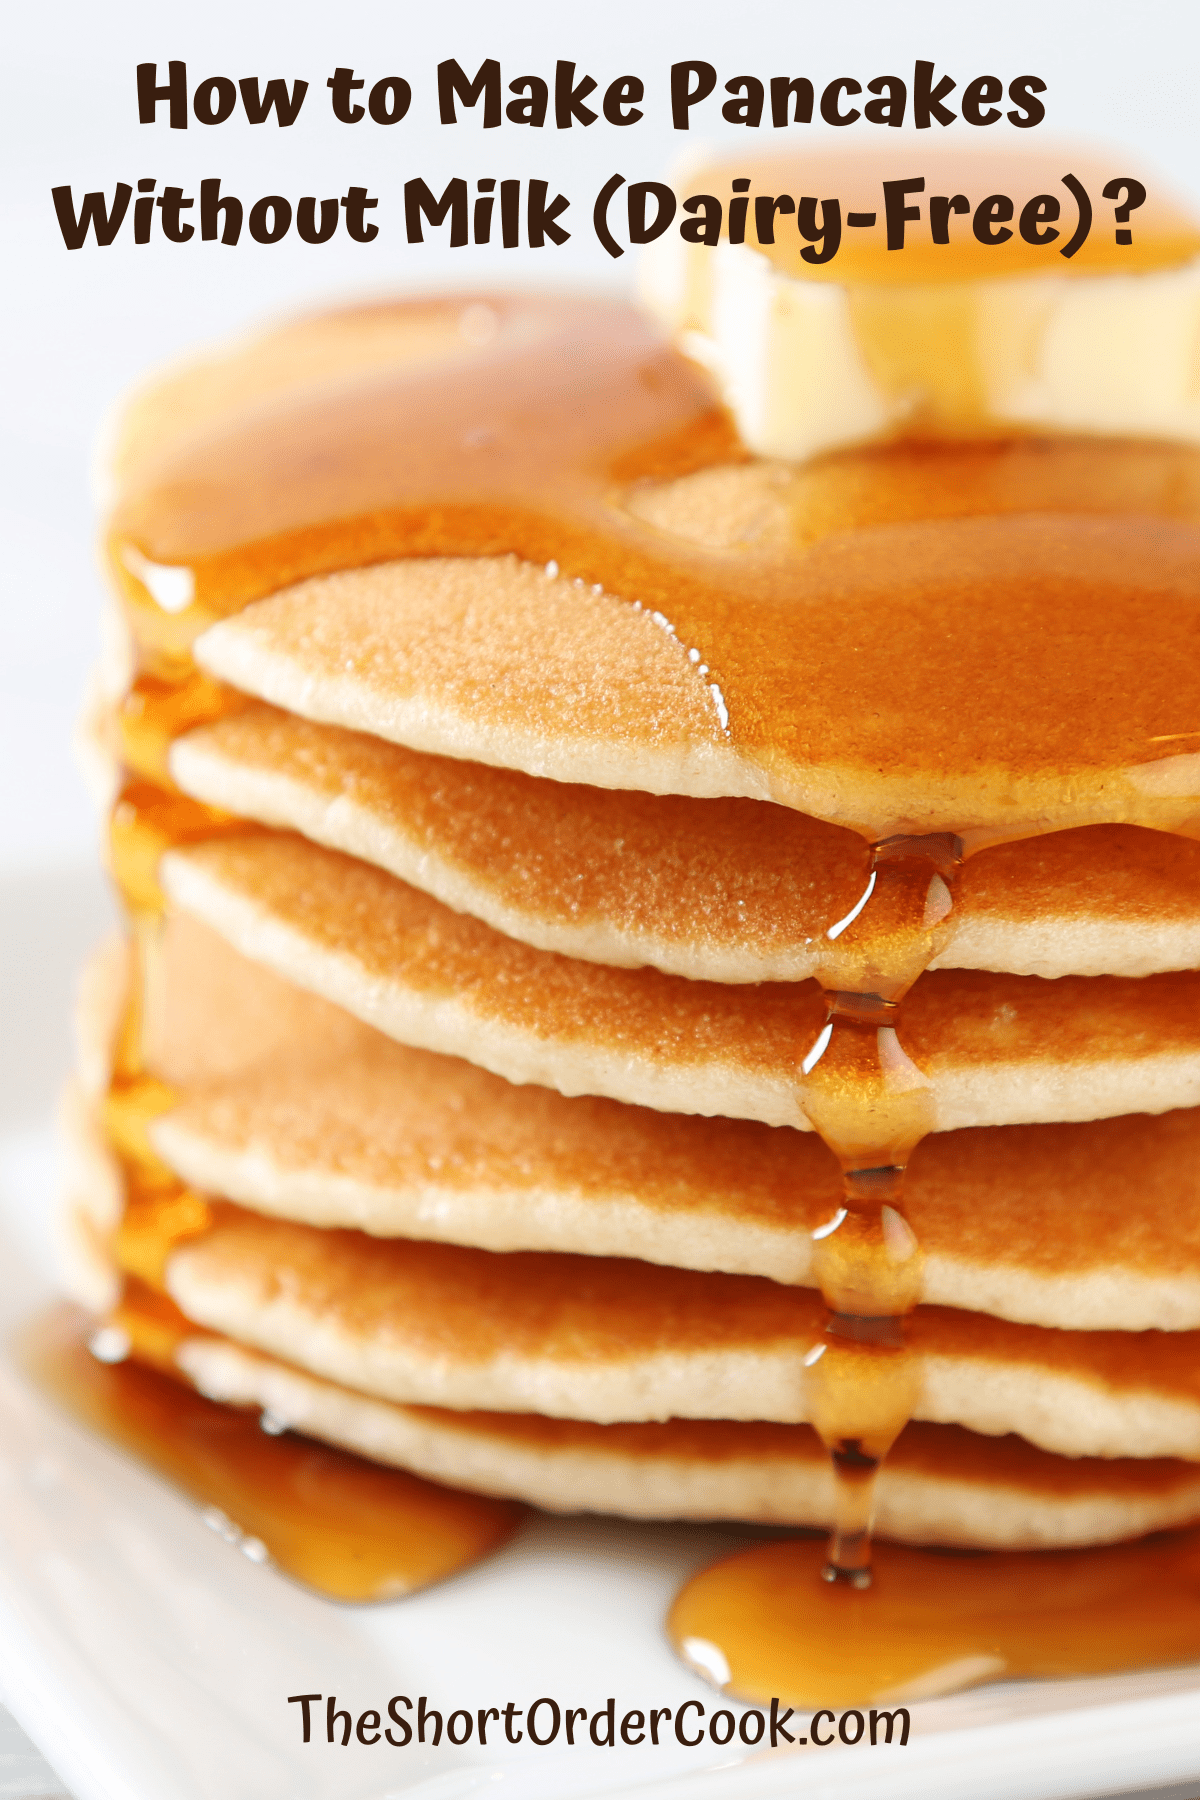 Stacks of pancakes on a plate.